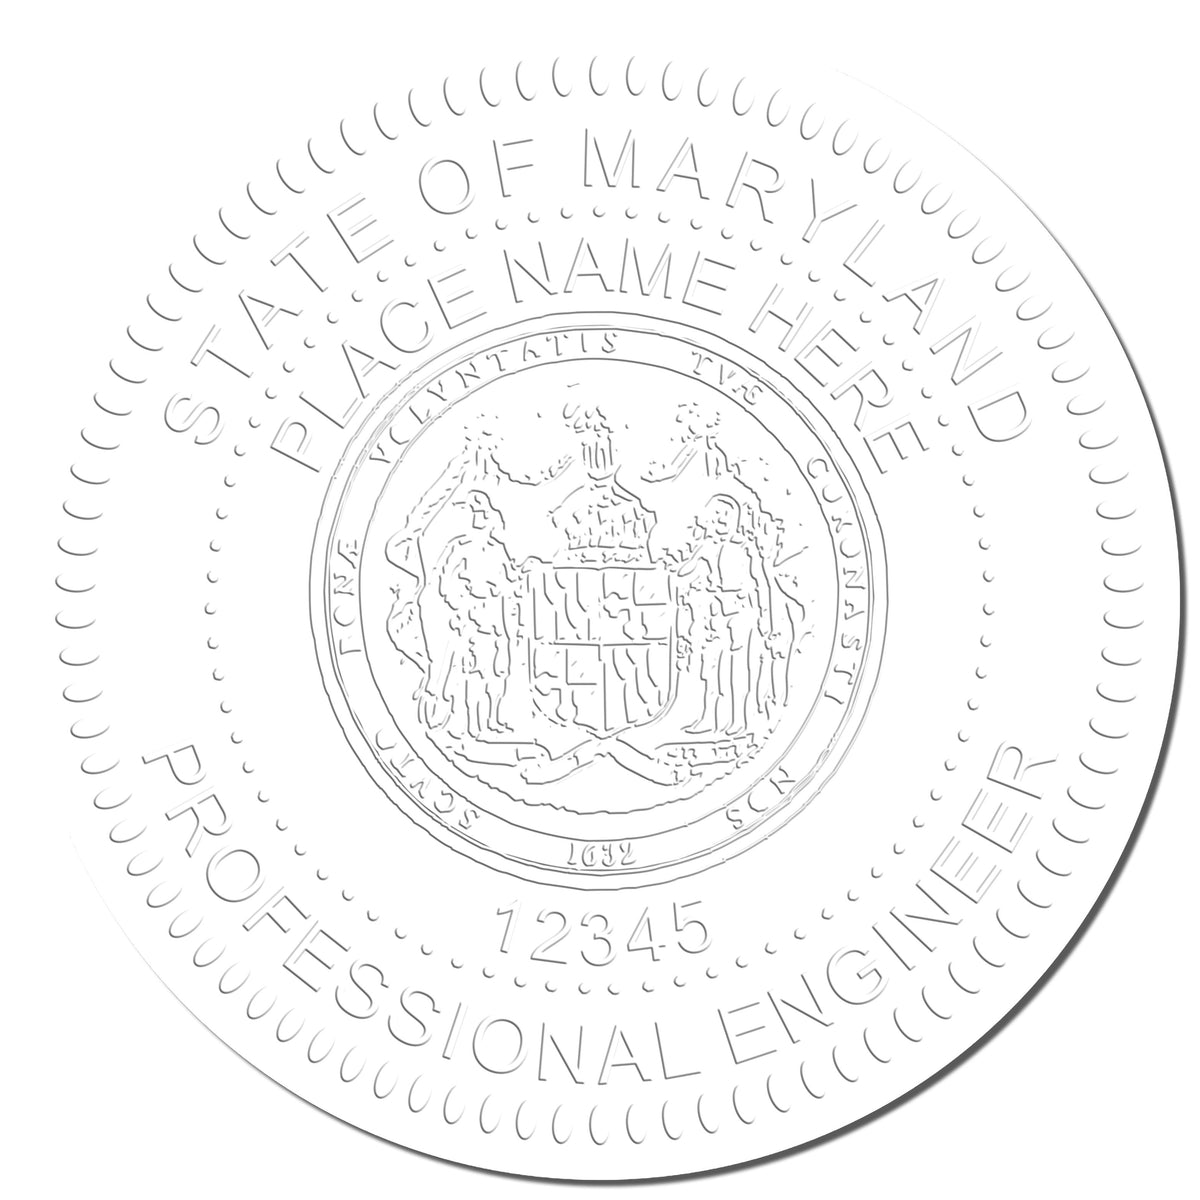 This paper is stamped with a sample imprint of the Hybrid Maryland Engineer Seal, signifying its quality and reliability.